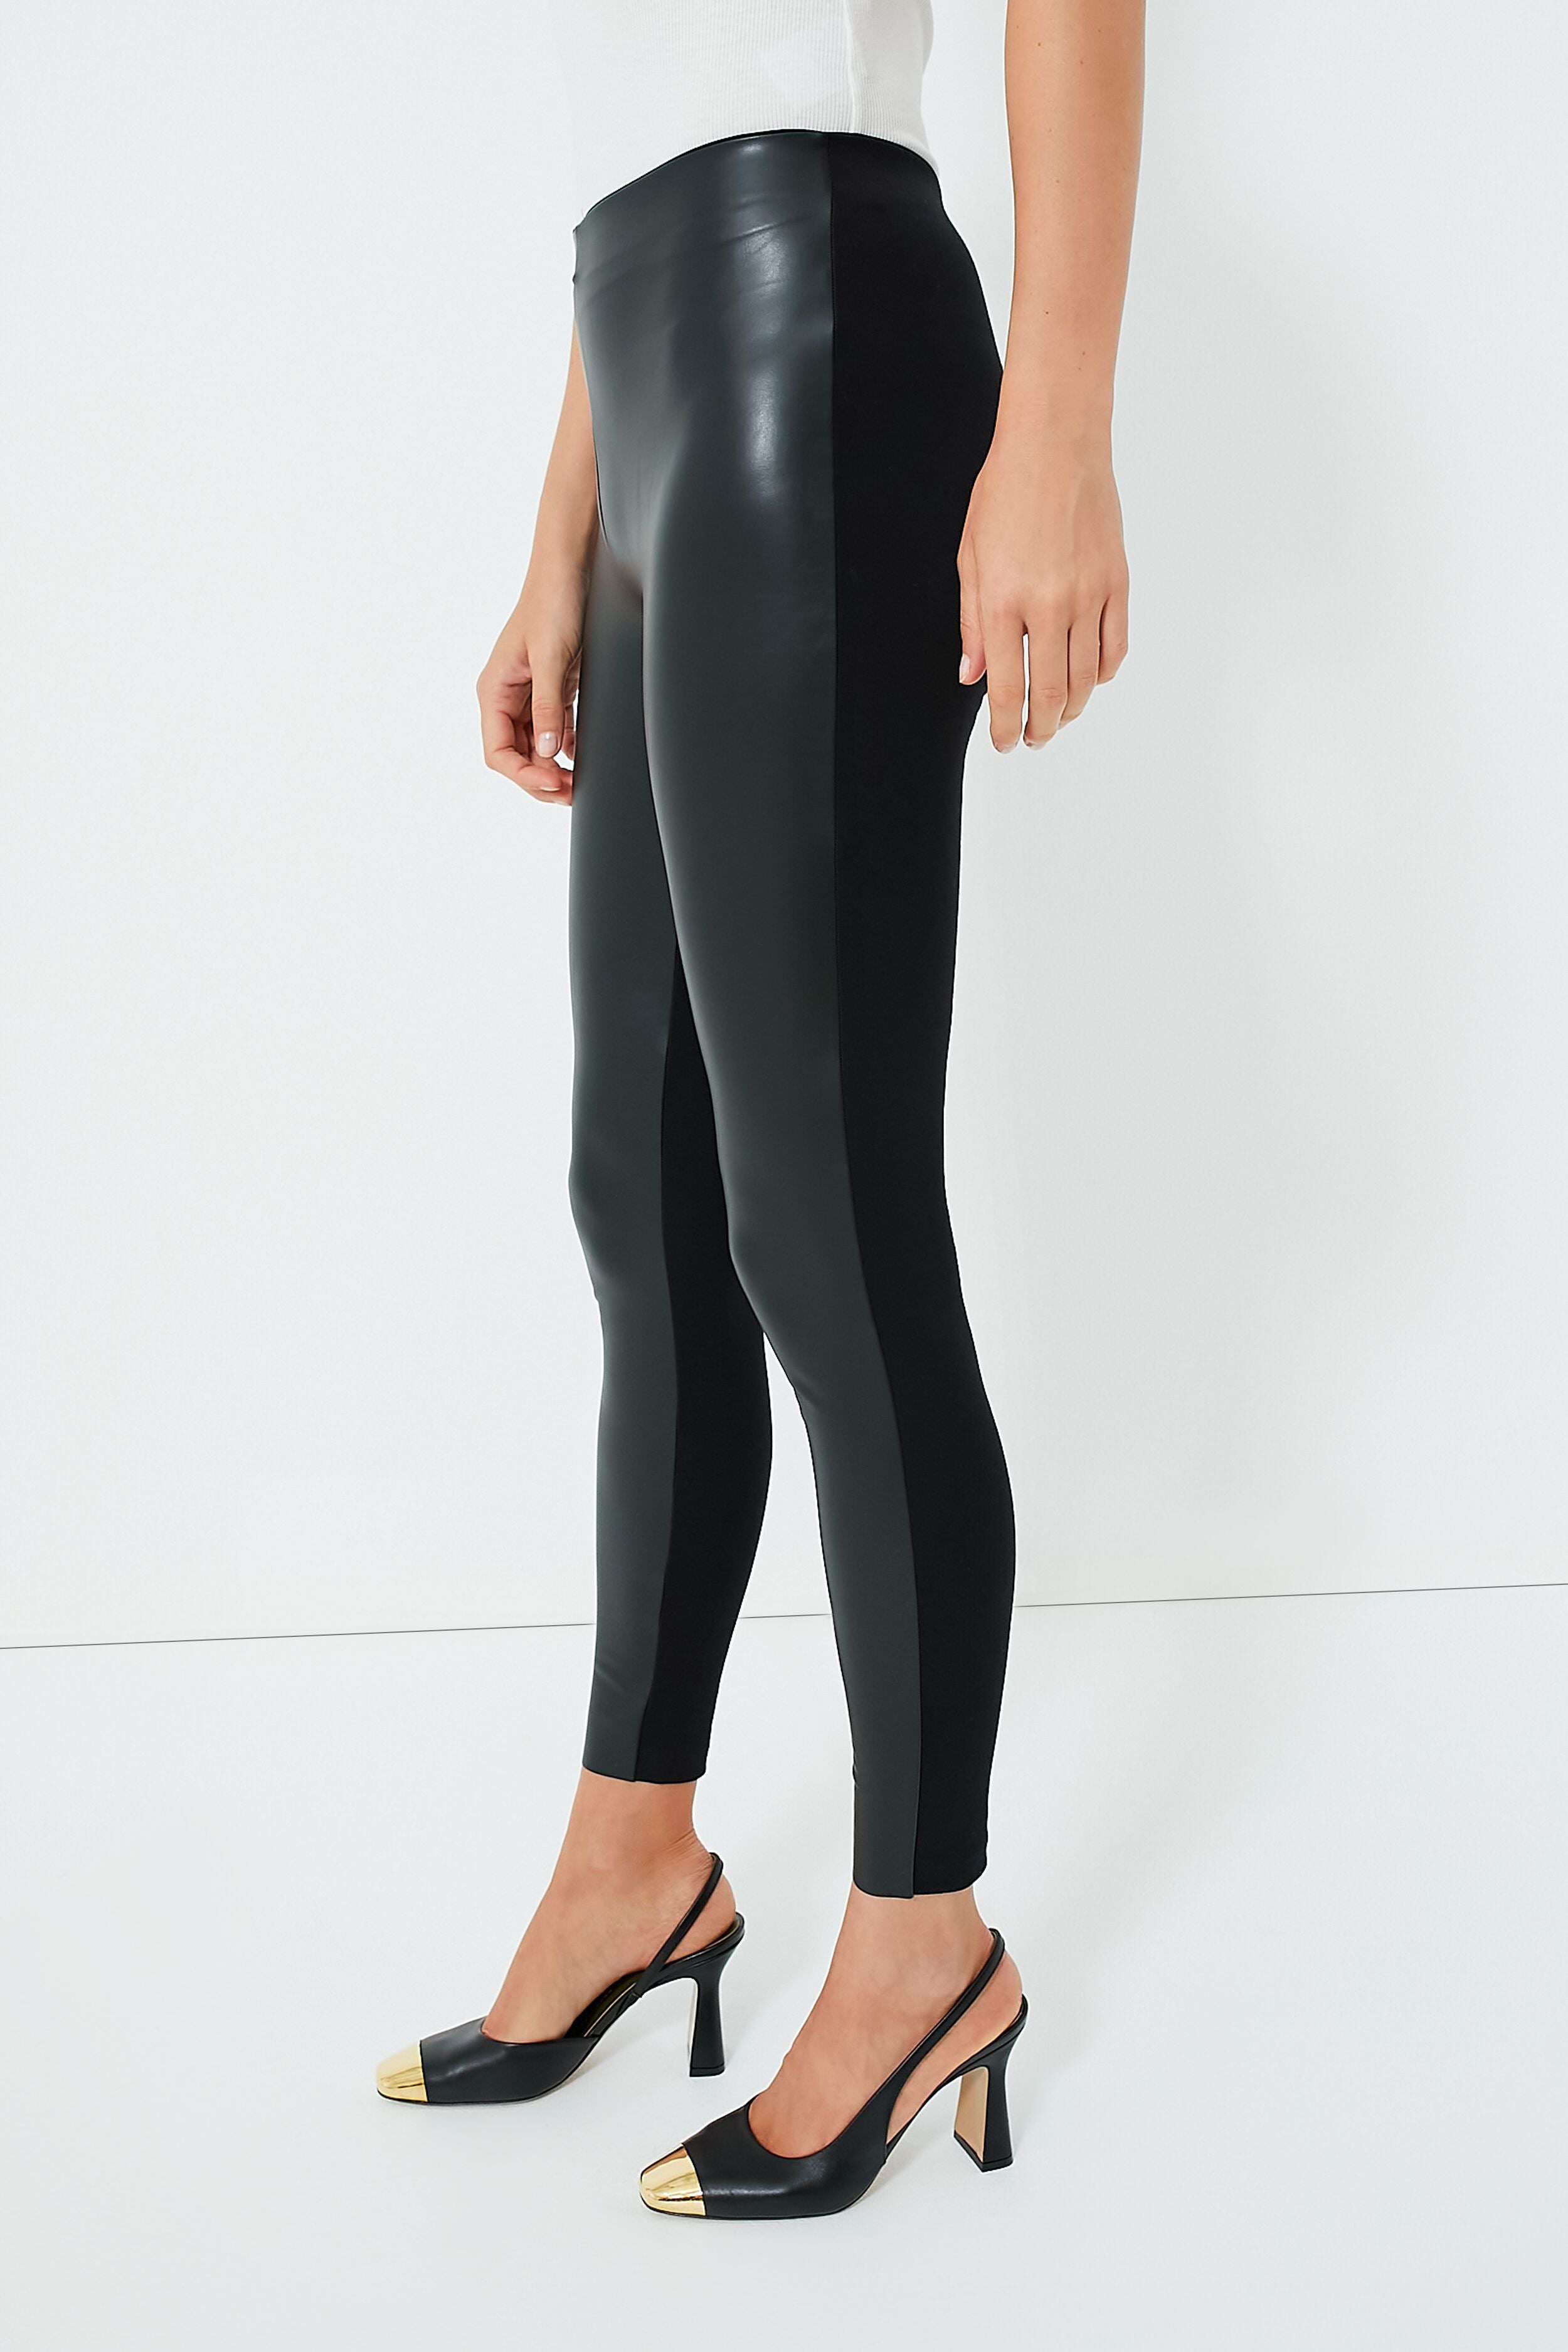 And Now This Women's Seamfront Faux-Leather Leggings - Macy's